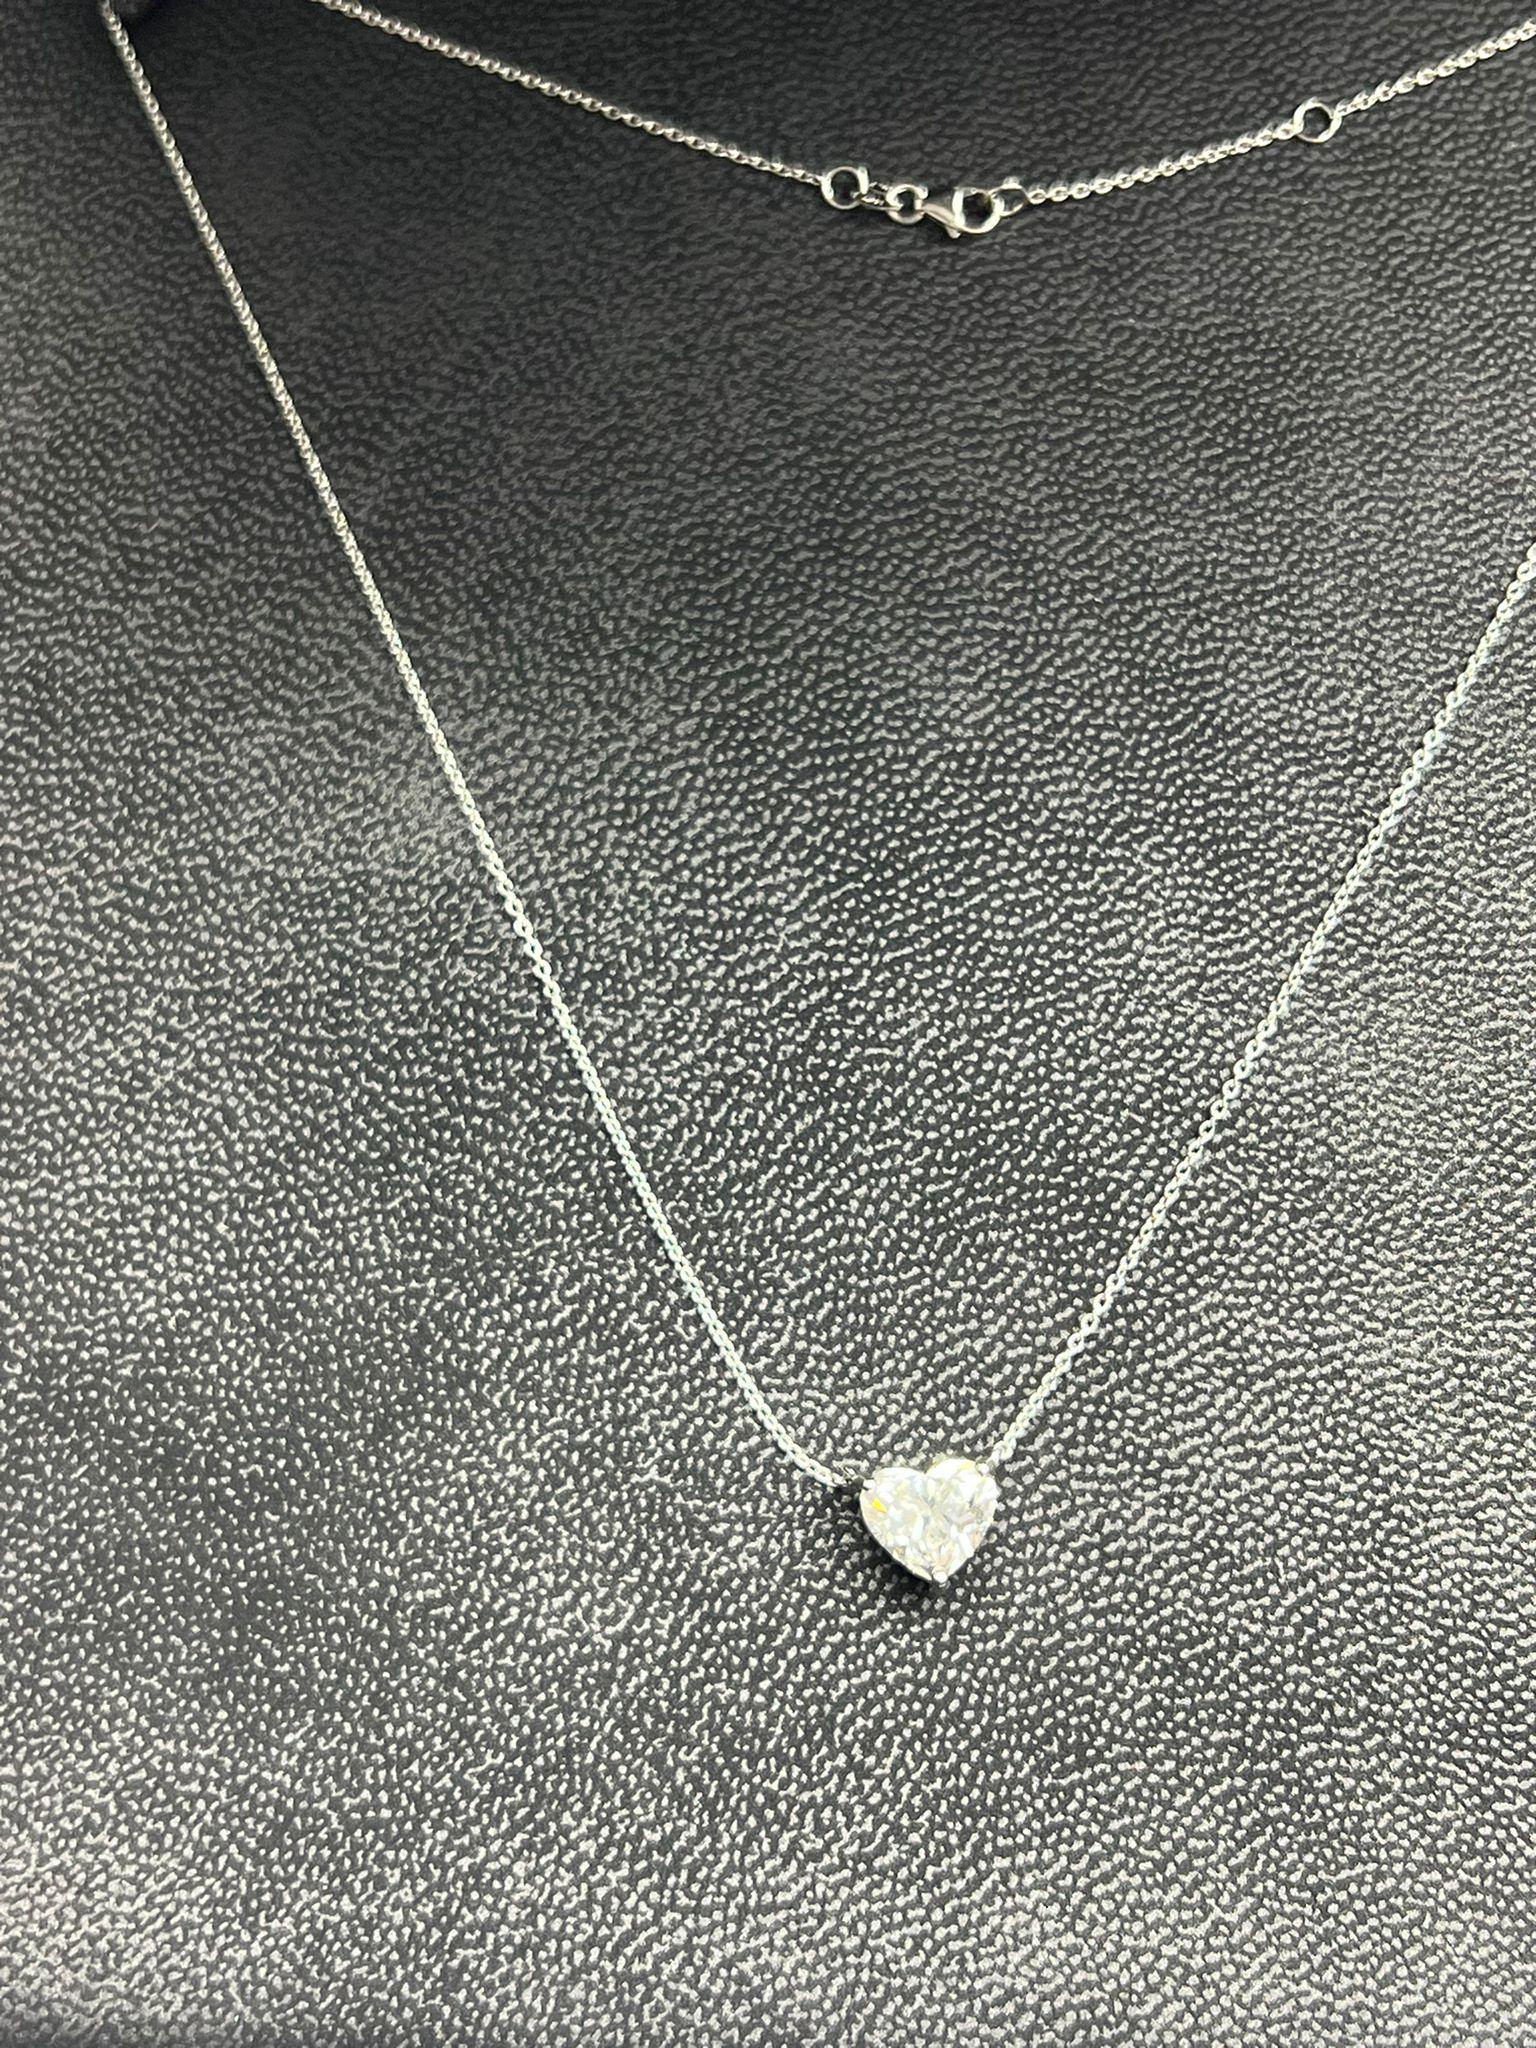 Necklace Information
Diamond Type : Natural Diamond
Metal : 14k Gold
Metal Color : Yellow Gold
Total Carat Weight : 0.31ct
Shape & Cut :	Heart Brilliant
Measurements : 9.77 x 8.38 x 6.08 mm
Color Grade :	G
Color Clarity : SI1


JEWELRY CARE
Over the